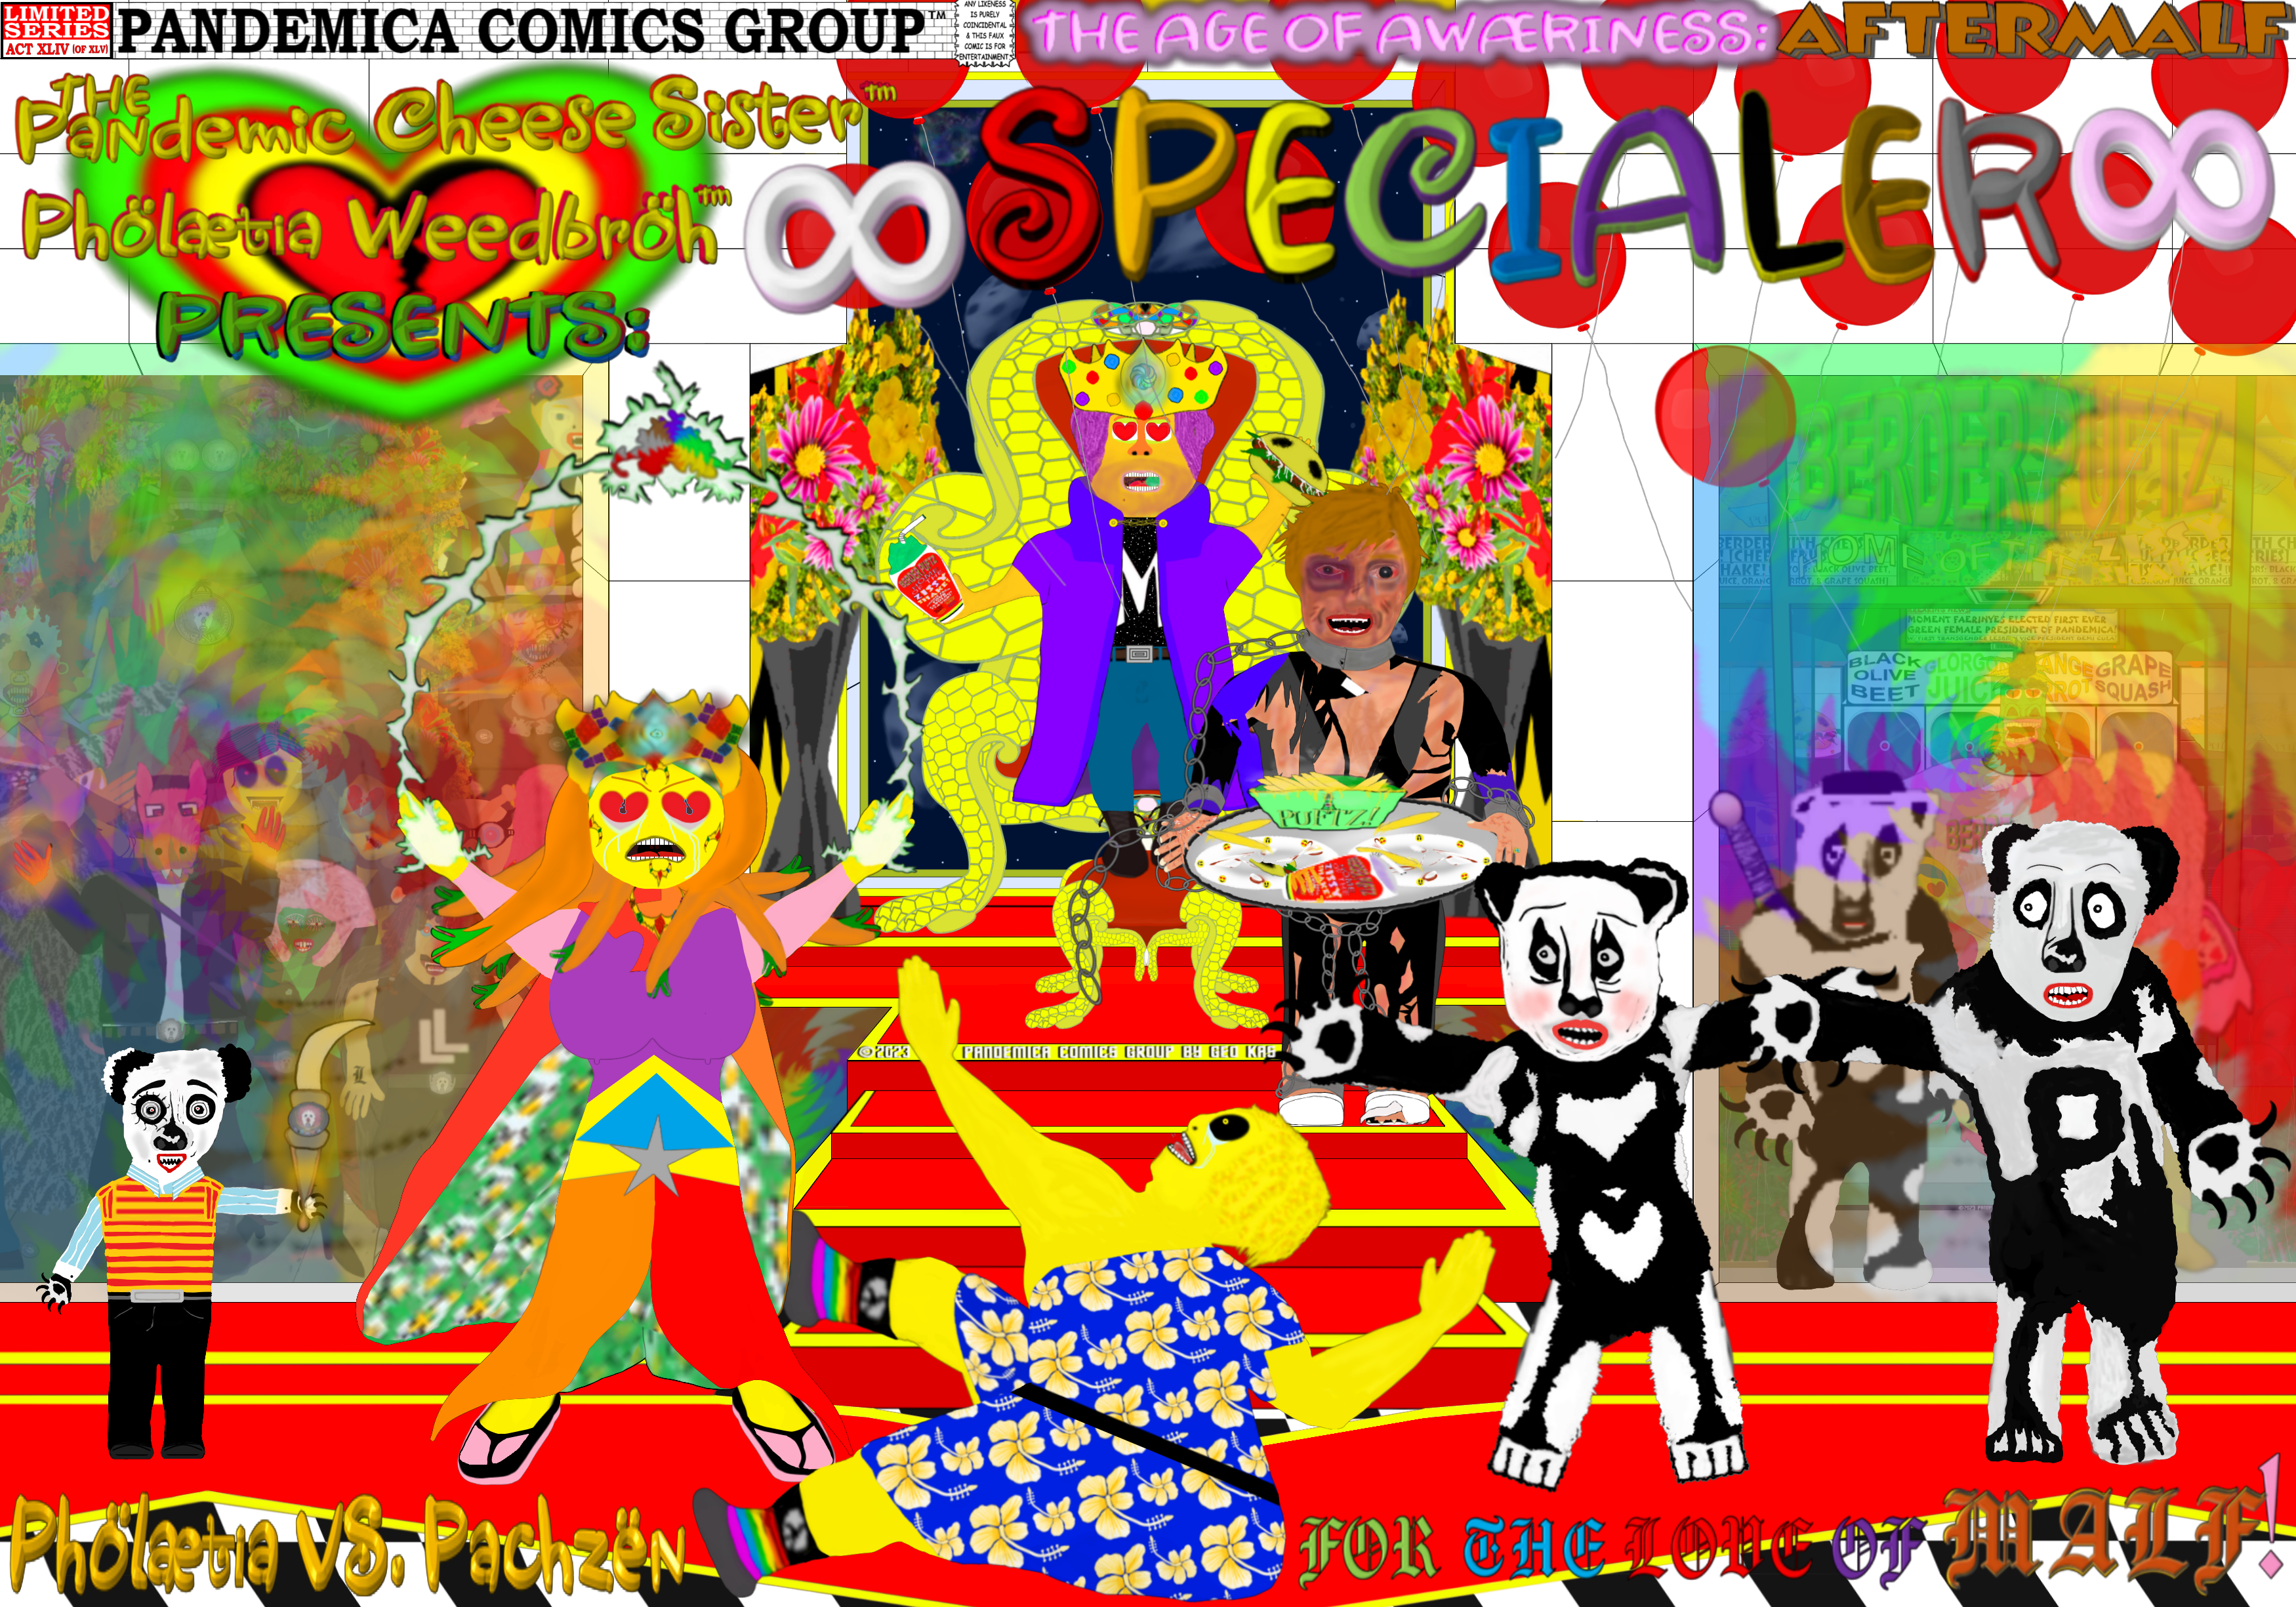 THE PANDEMIC CHESE SISTER PRESENTS: SPECIALER [RETAILER COVER]